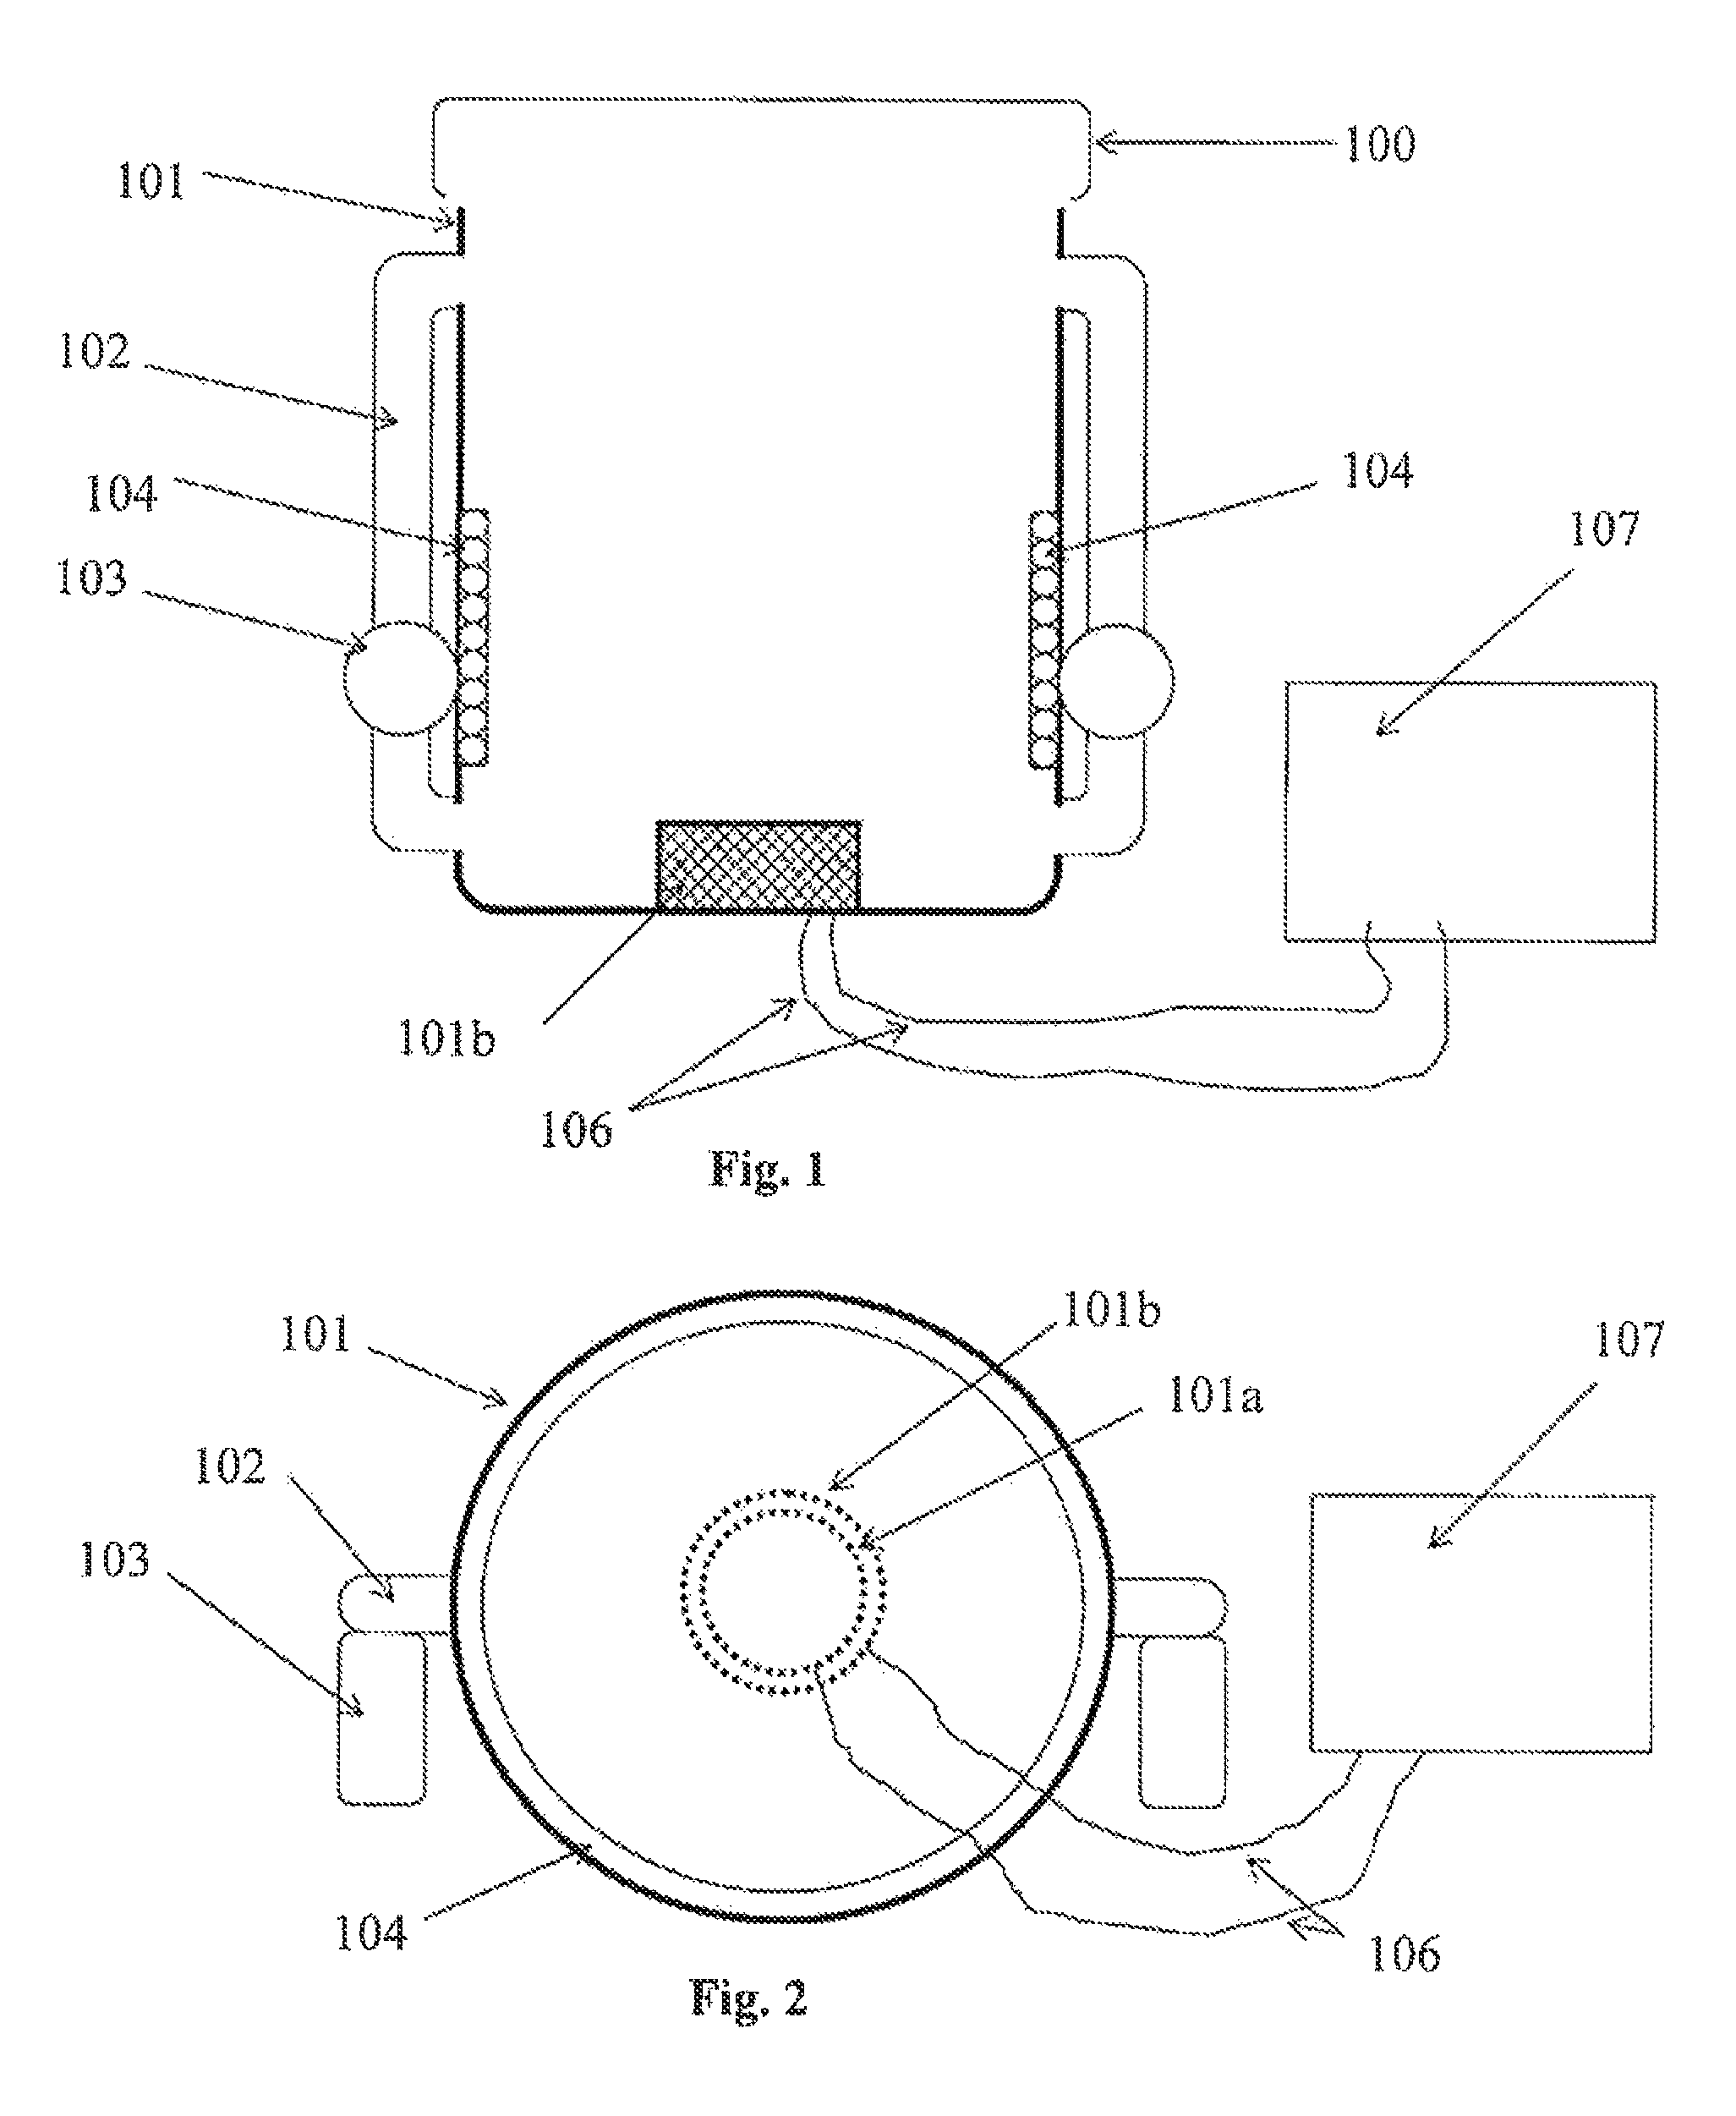 Method and apparatus for producing a stablized antimicrobial non-toxic electrolyzed saline solution exhibiting potential as a therapeutic